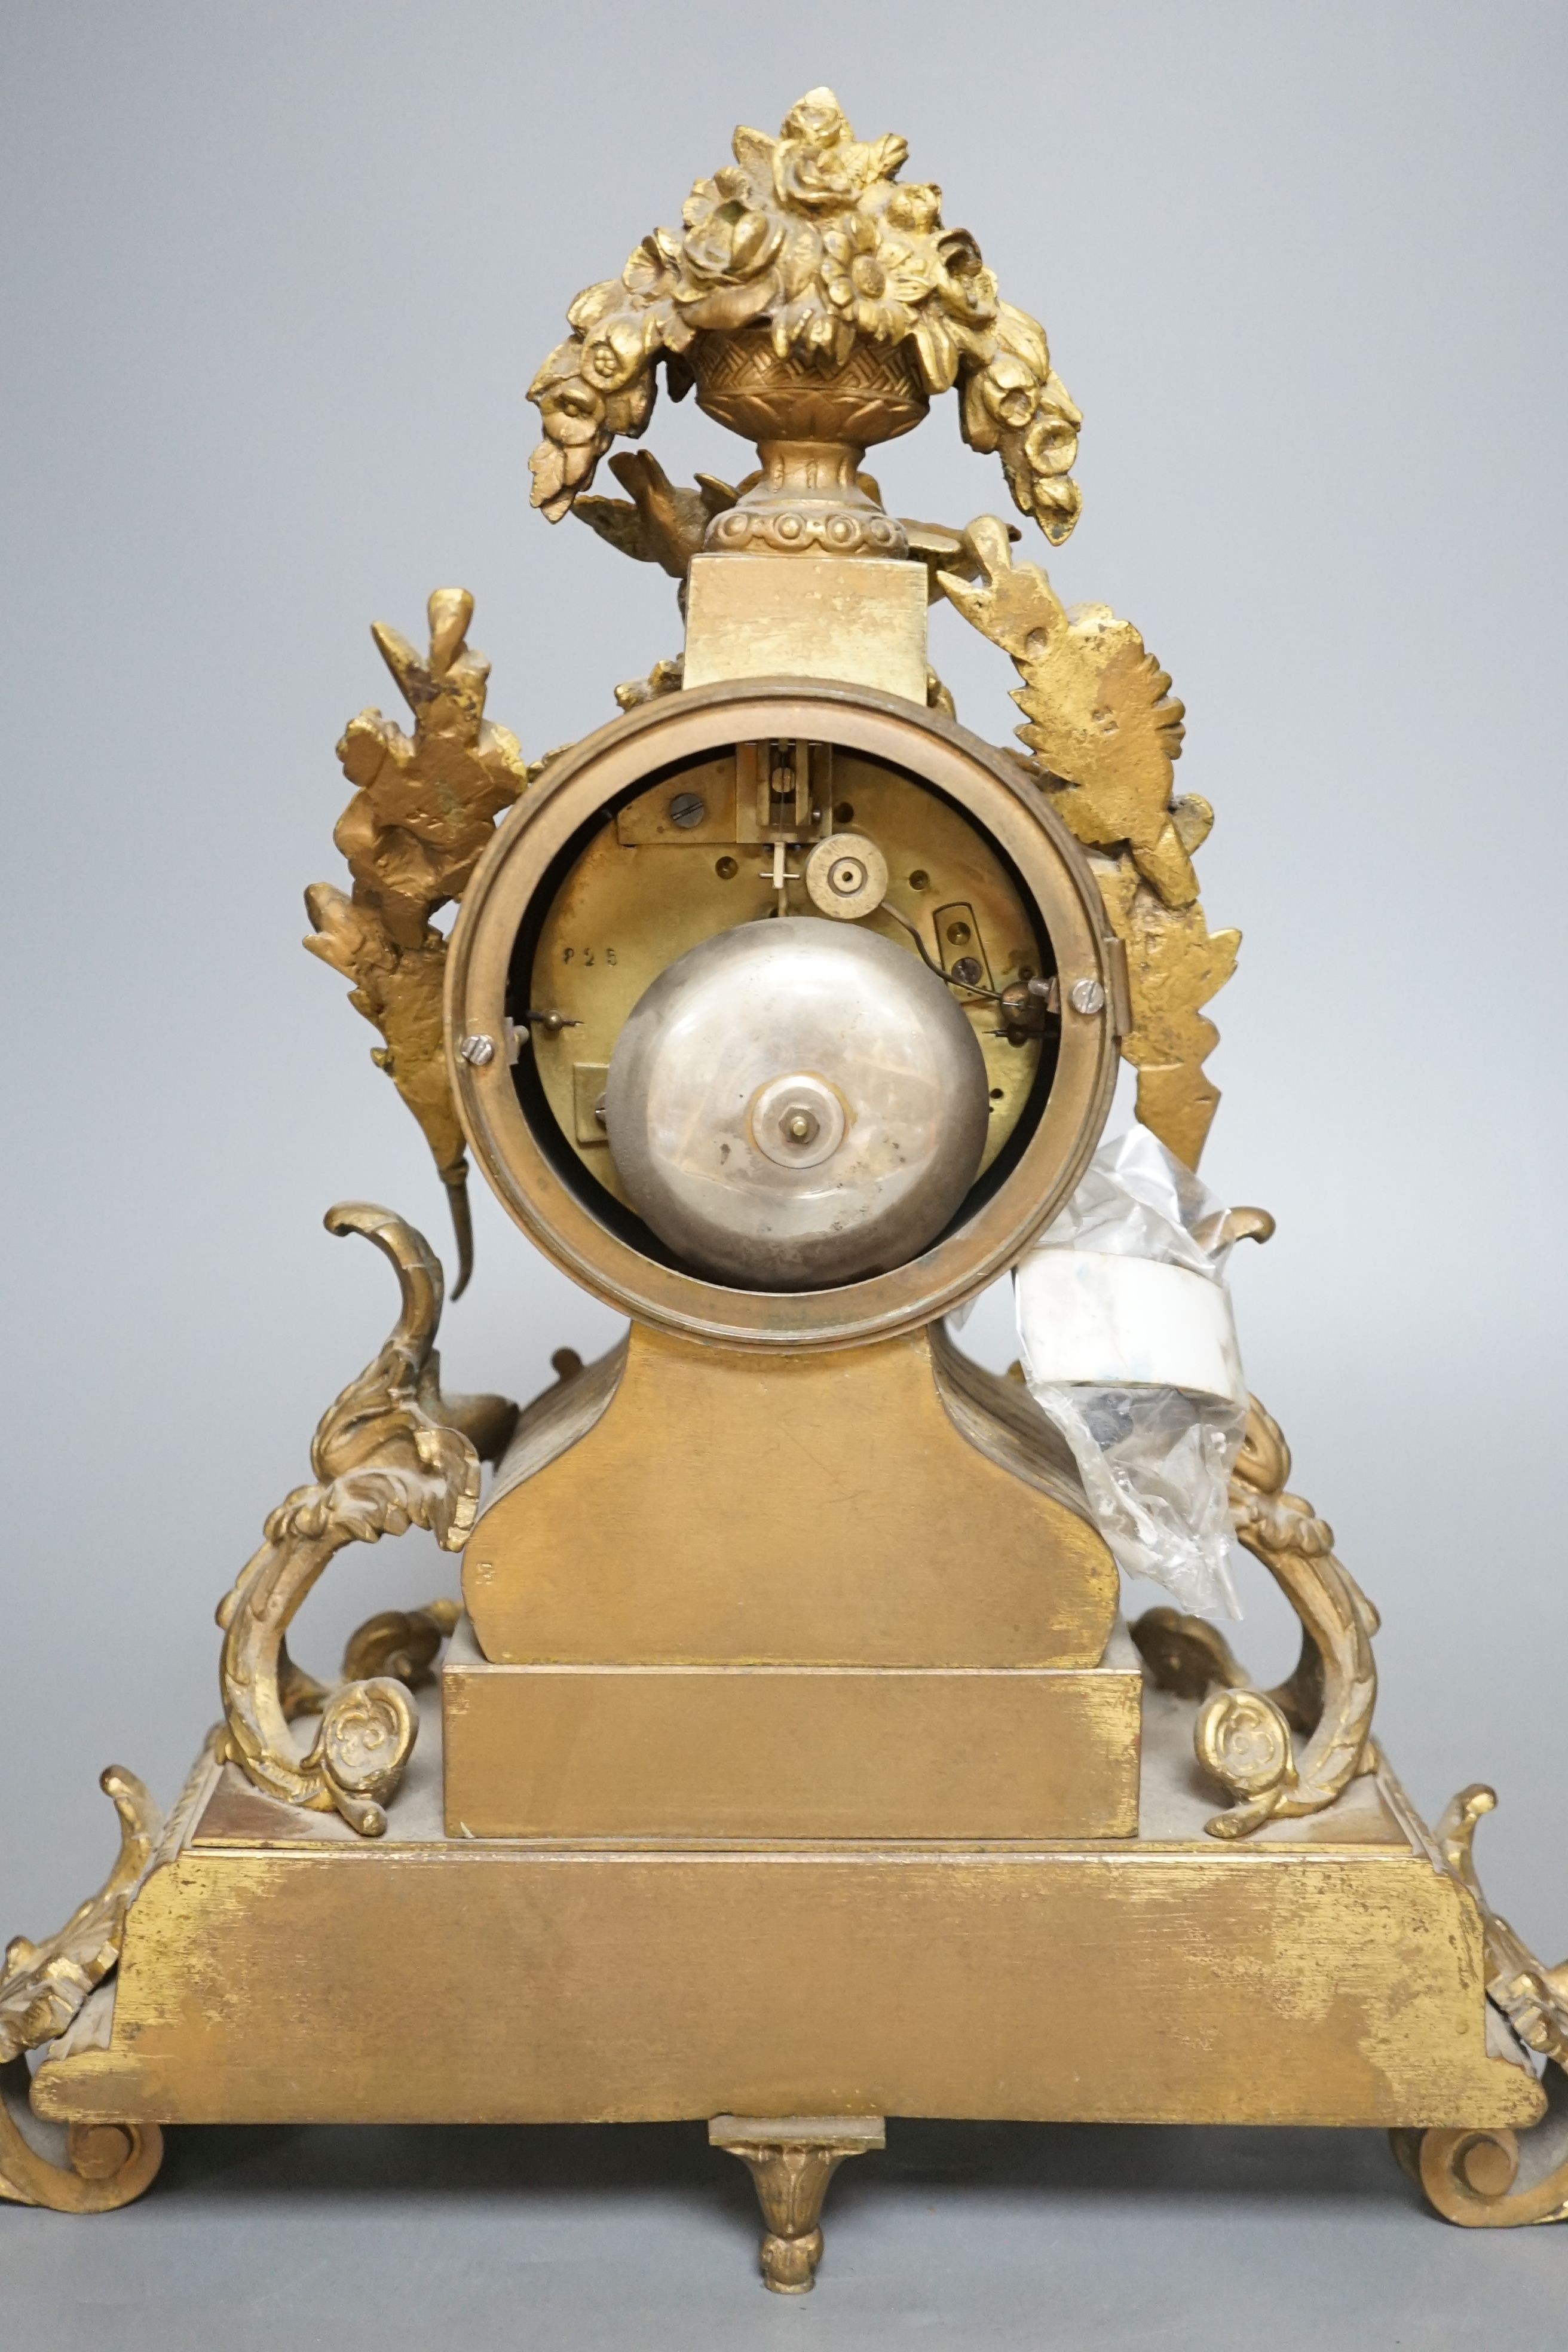 A 19th century French Sevres style porcelain and ormolu mantel clock - 35cm tall